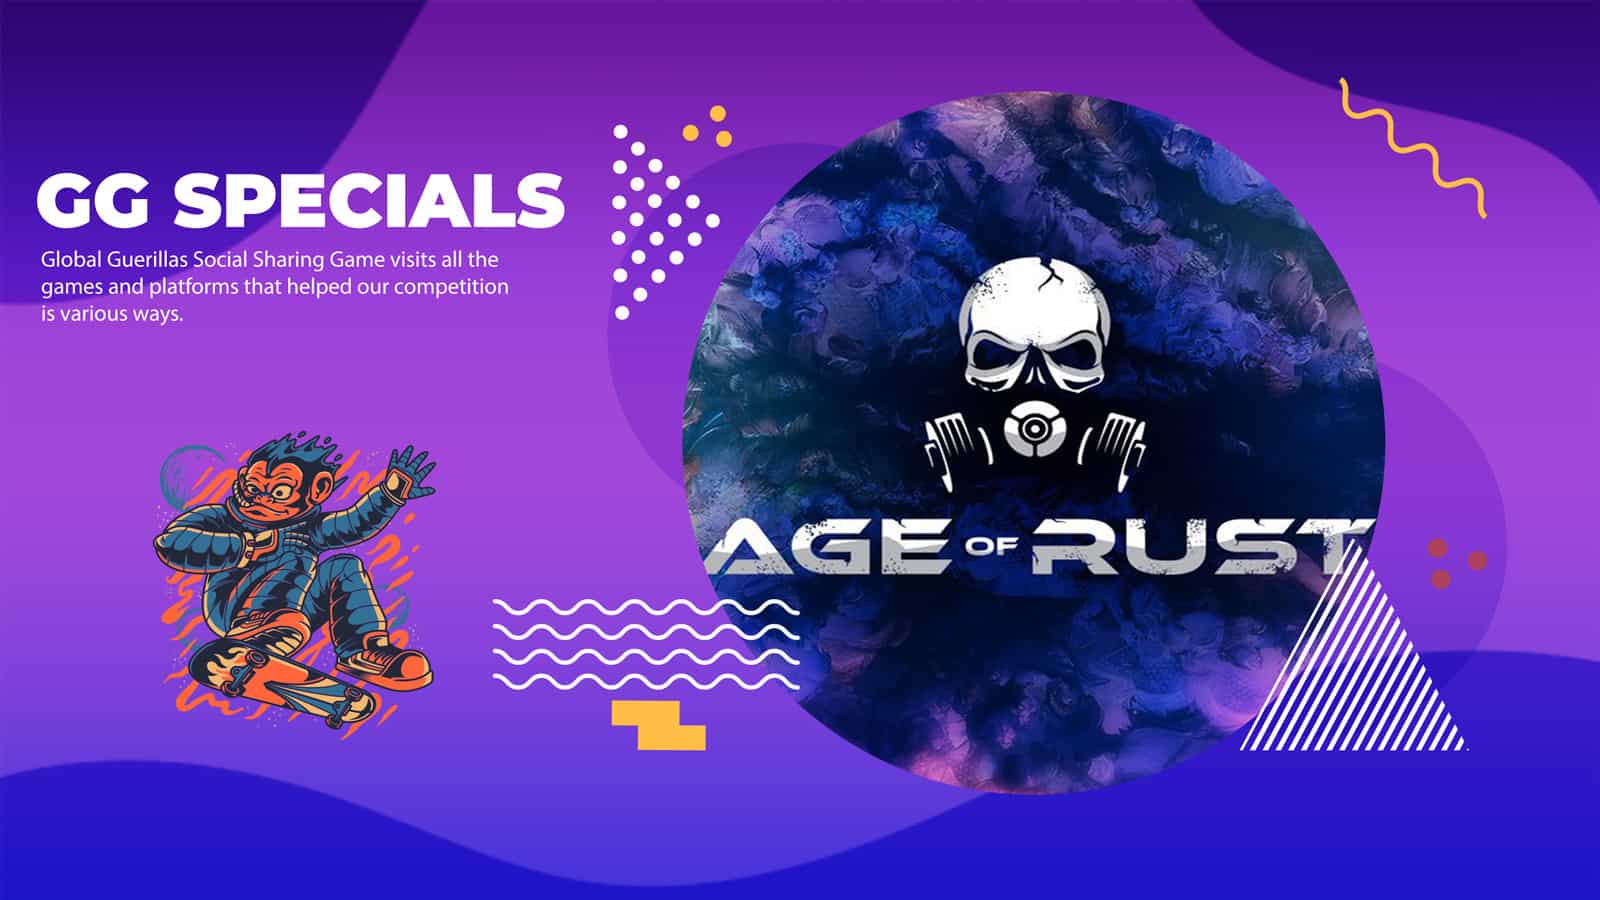 age of rust gg We bring you the third article of the GG specials and today we have on the spotlight one of the best puzzle and exploration game in the Enjin Multiverse, Age of Rust.